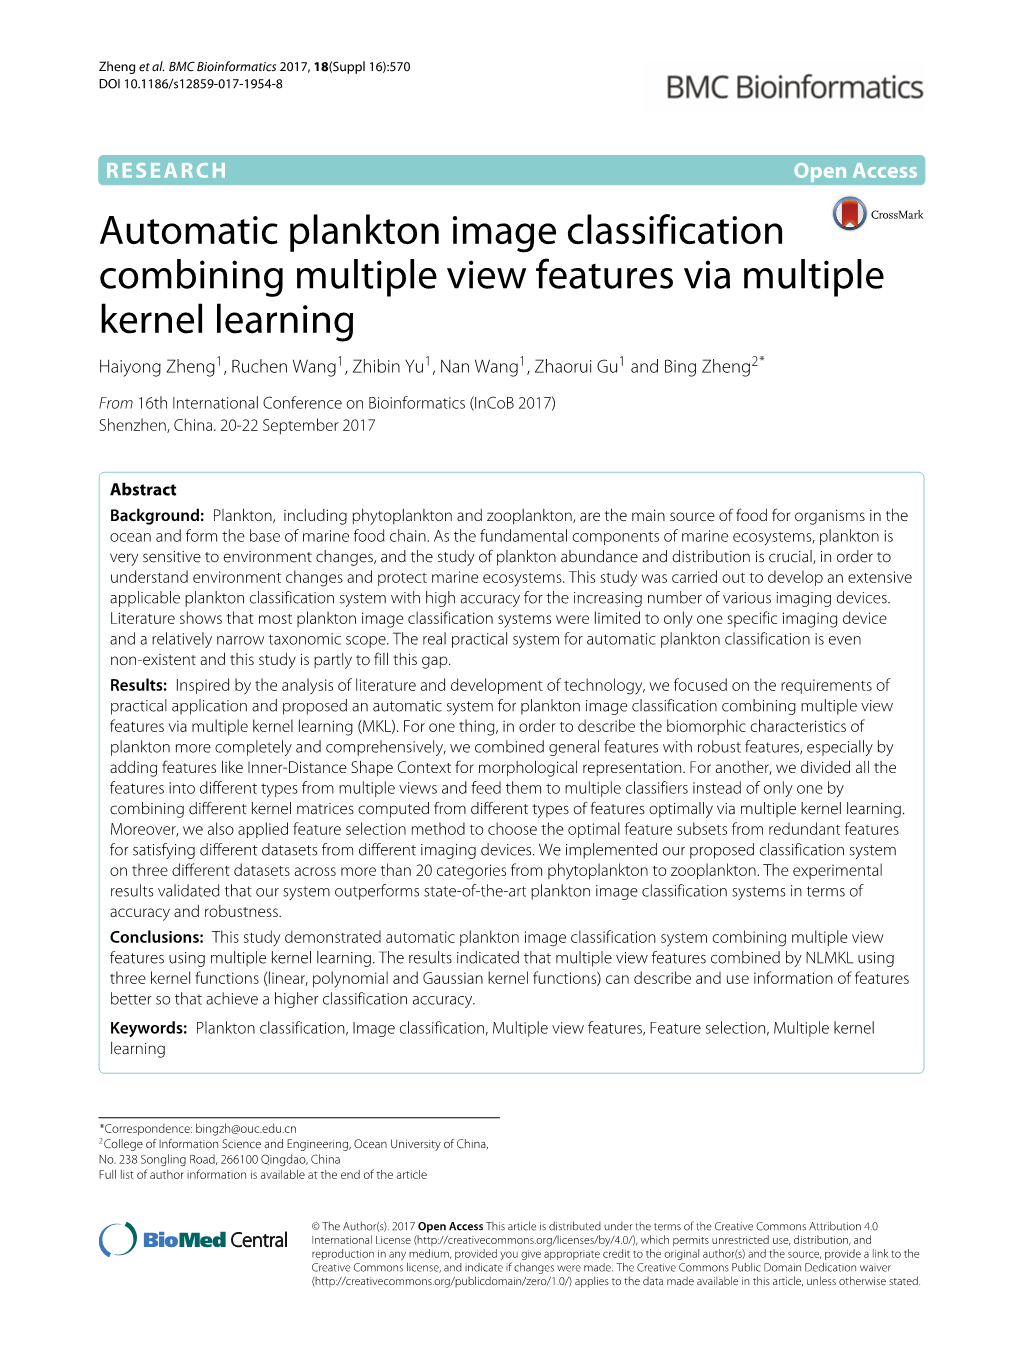 Automatic Plankton Image Classification Combining Multiple View Features Via Multiple Kernel Learning